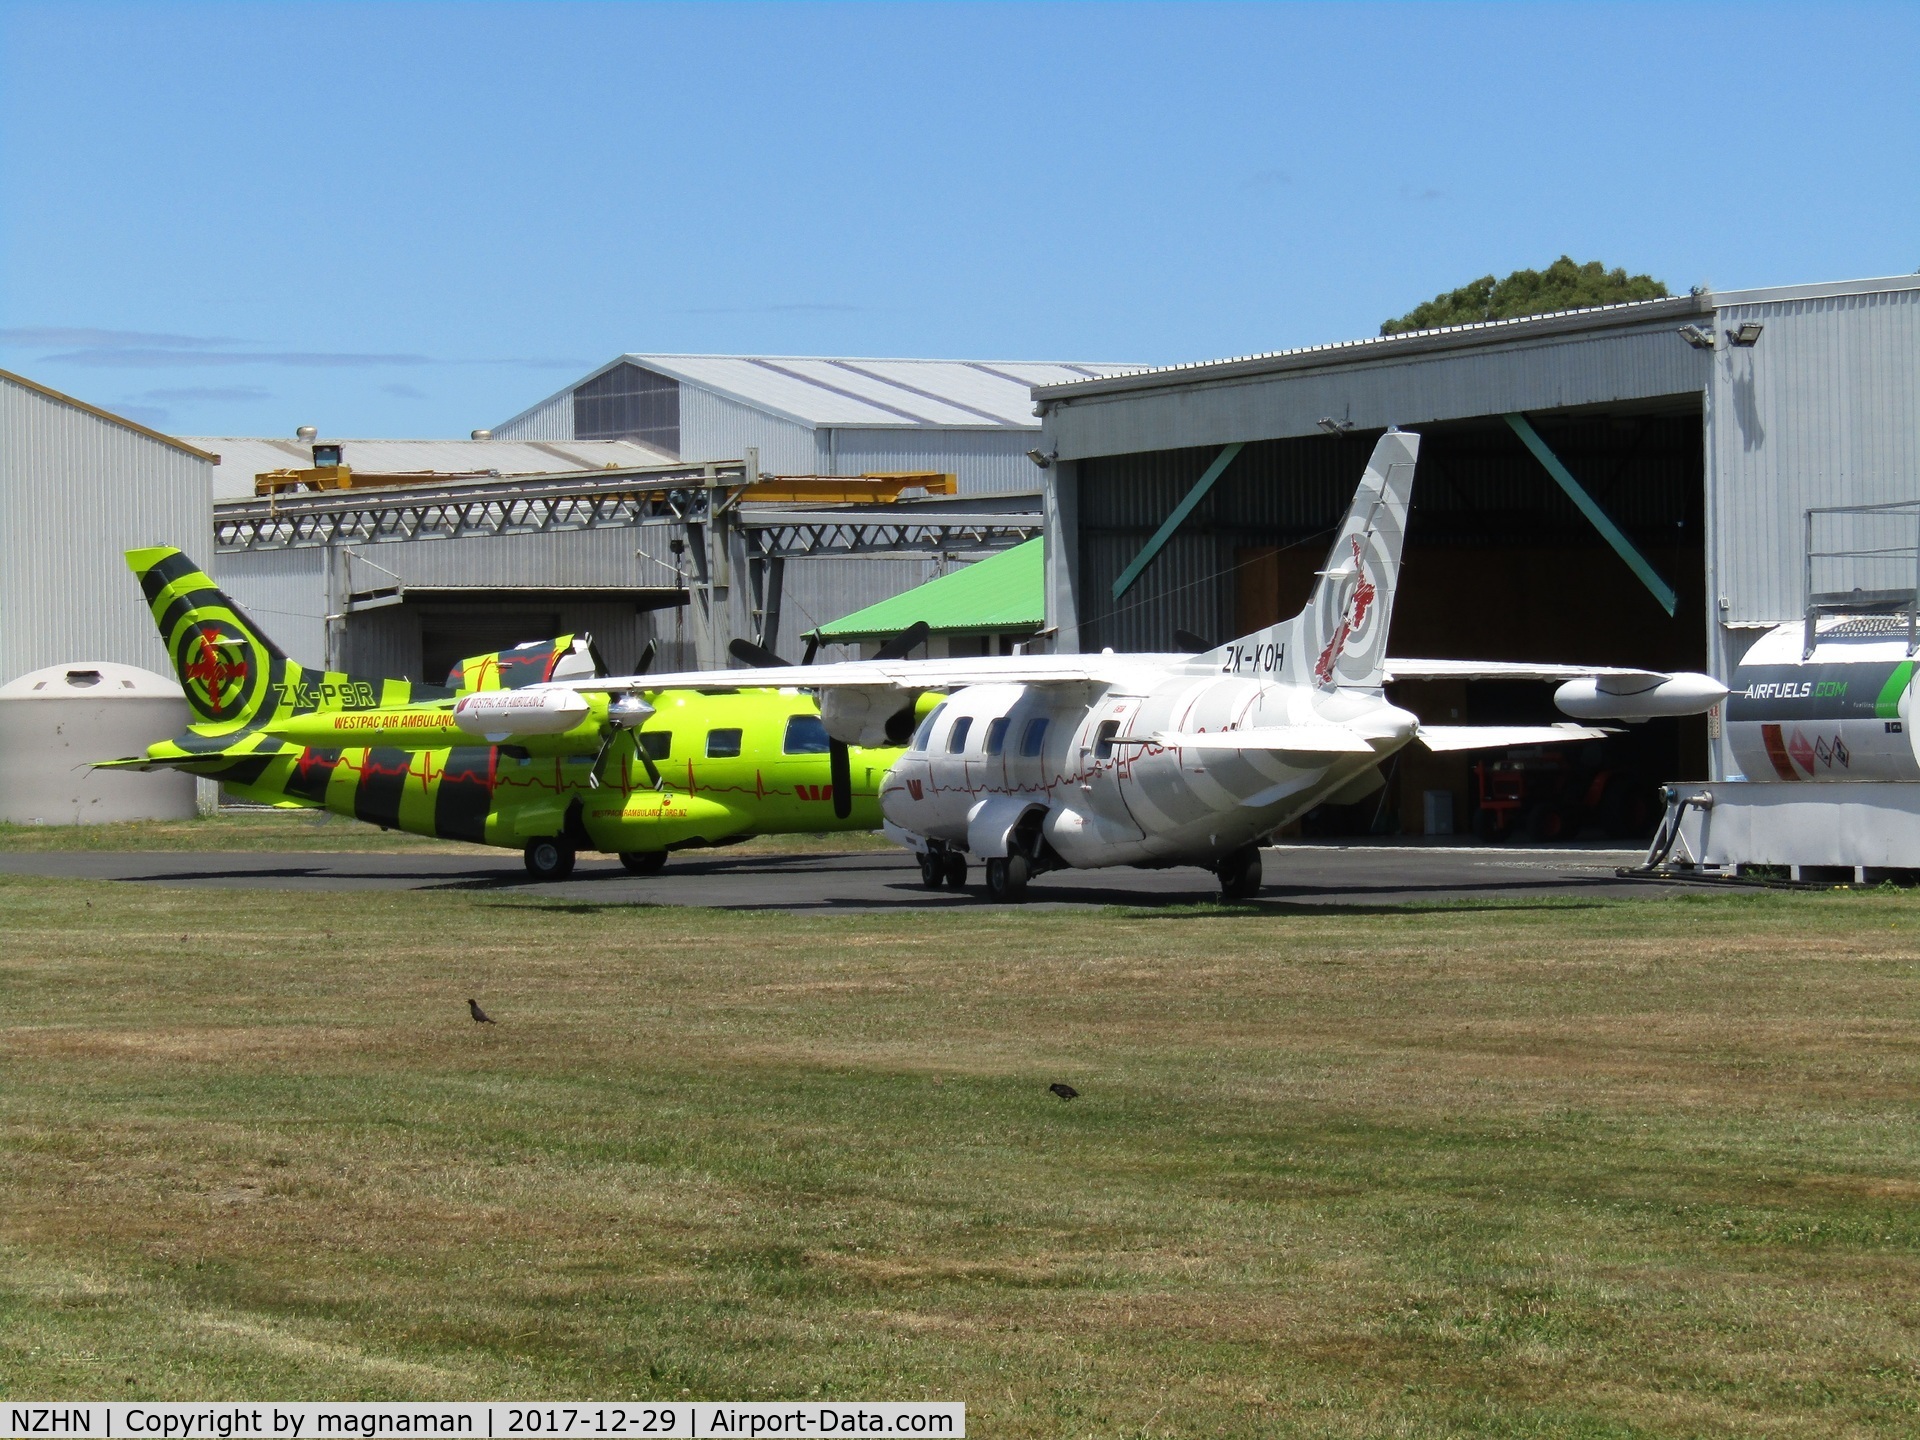 Hamilton International Airport, Hamilton New Zealand (NZHN) - central area of airport with 2 x medic MU-2 - only ones in NZ